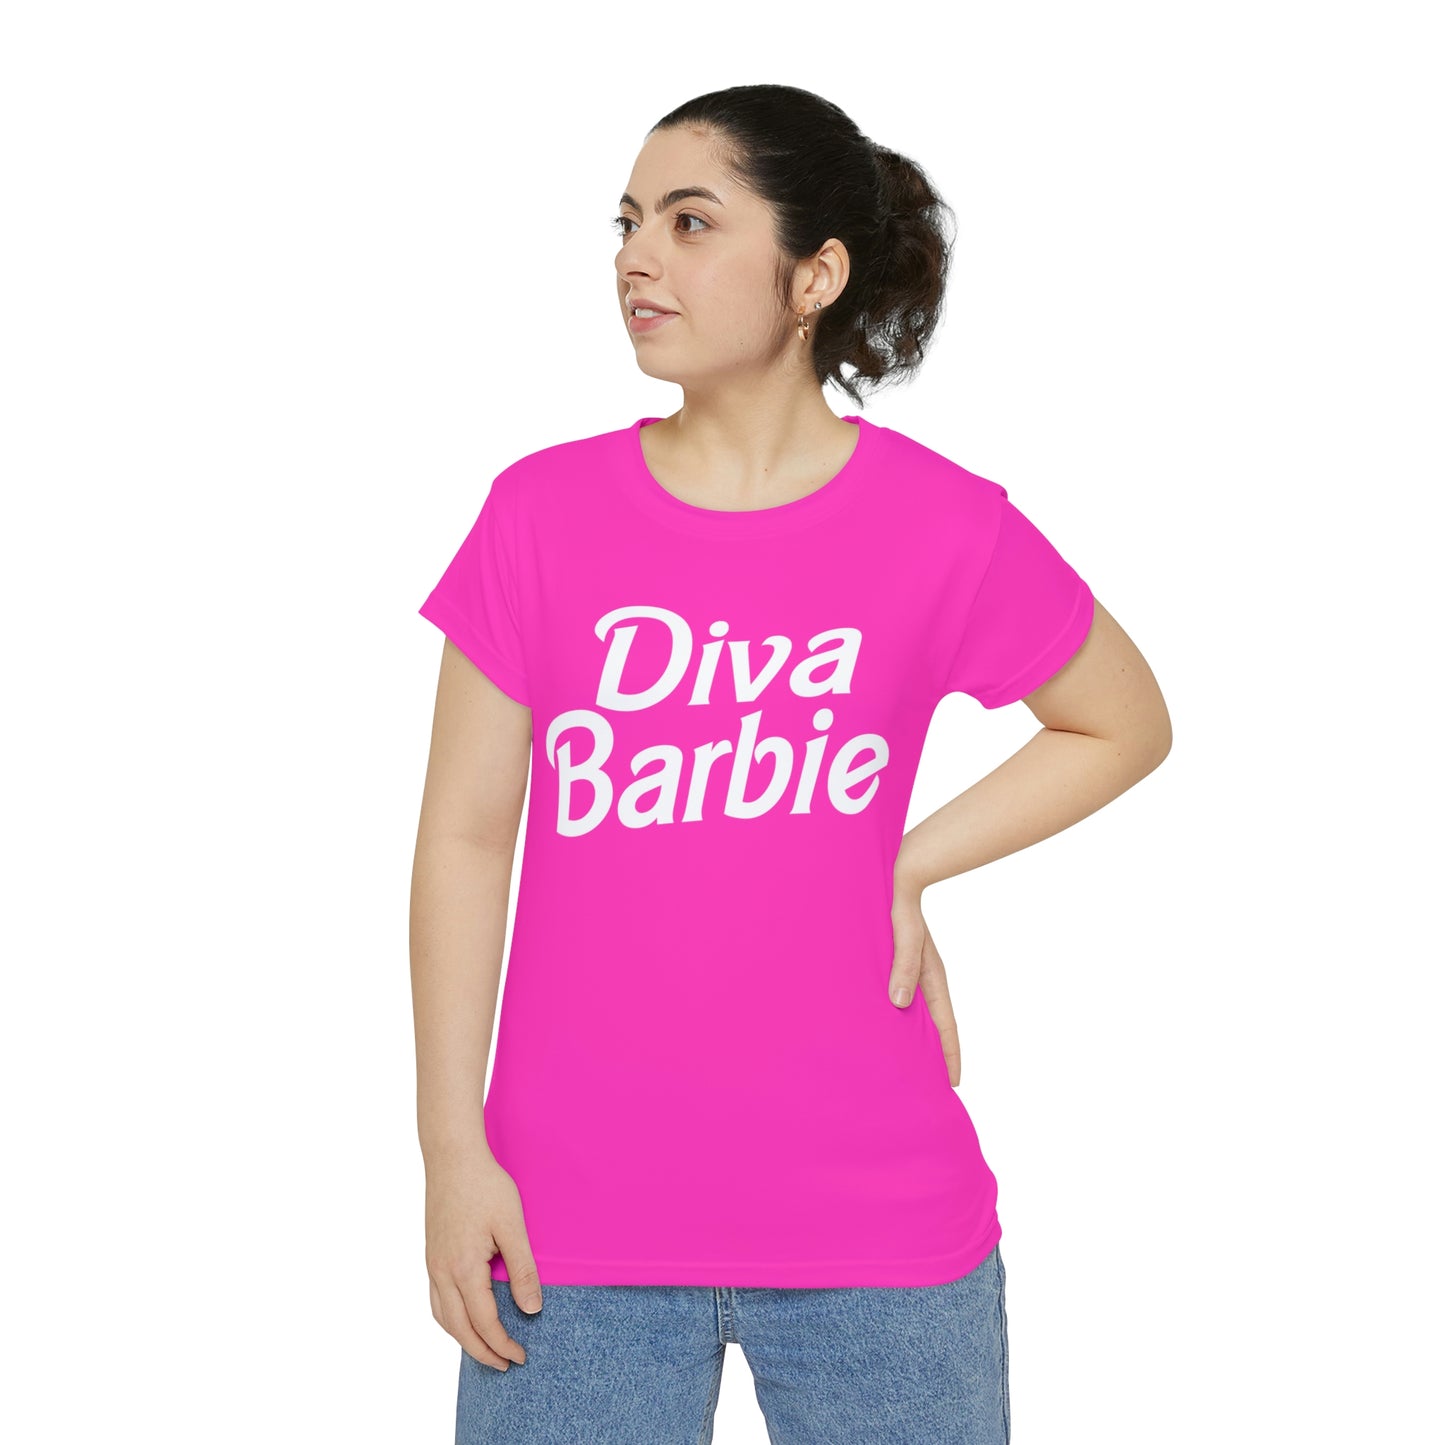 Diva Barbie, Bachelorette Party Shirts, Bridesmaid Gifts, Here comes the Party Tees, Group Party Favor Shirts, Bridal Party Shirt for women